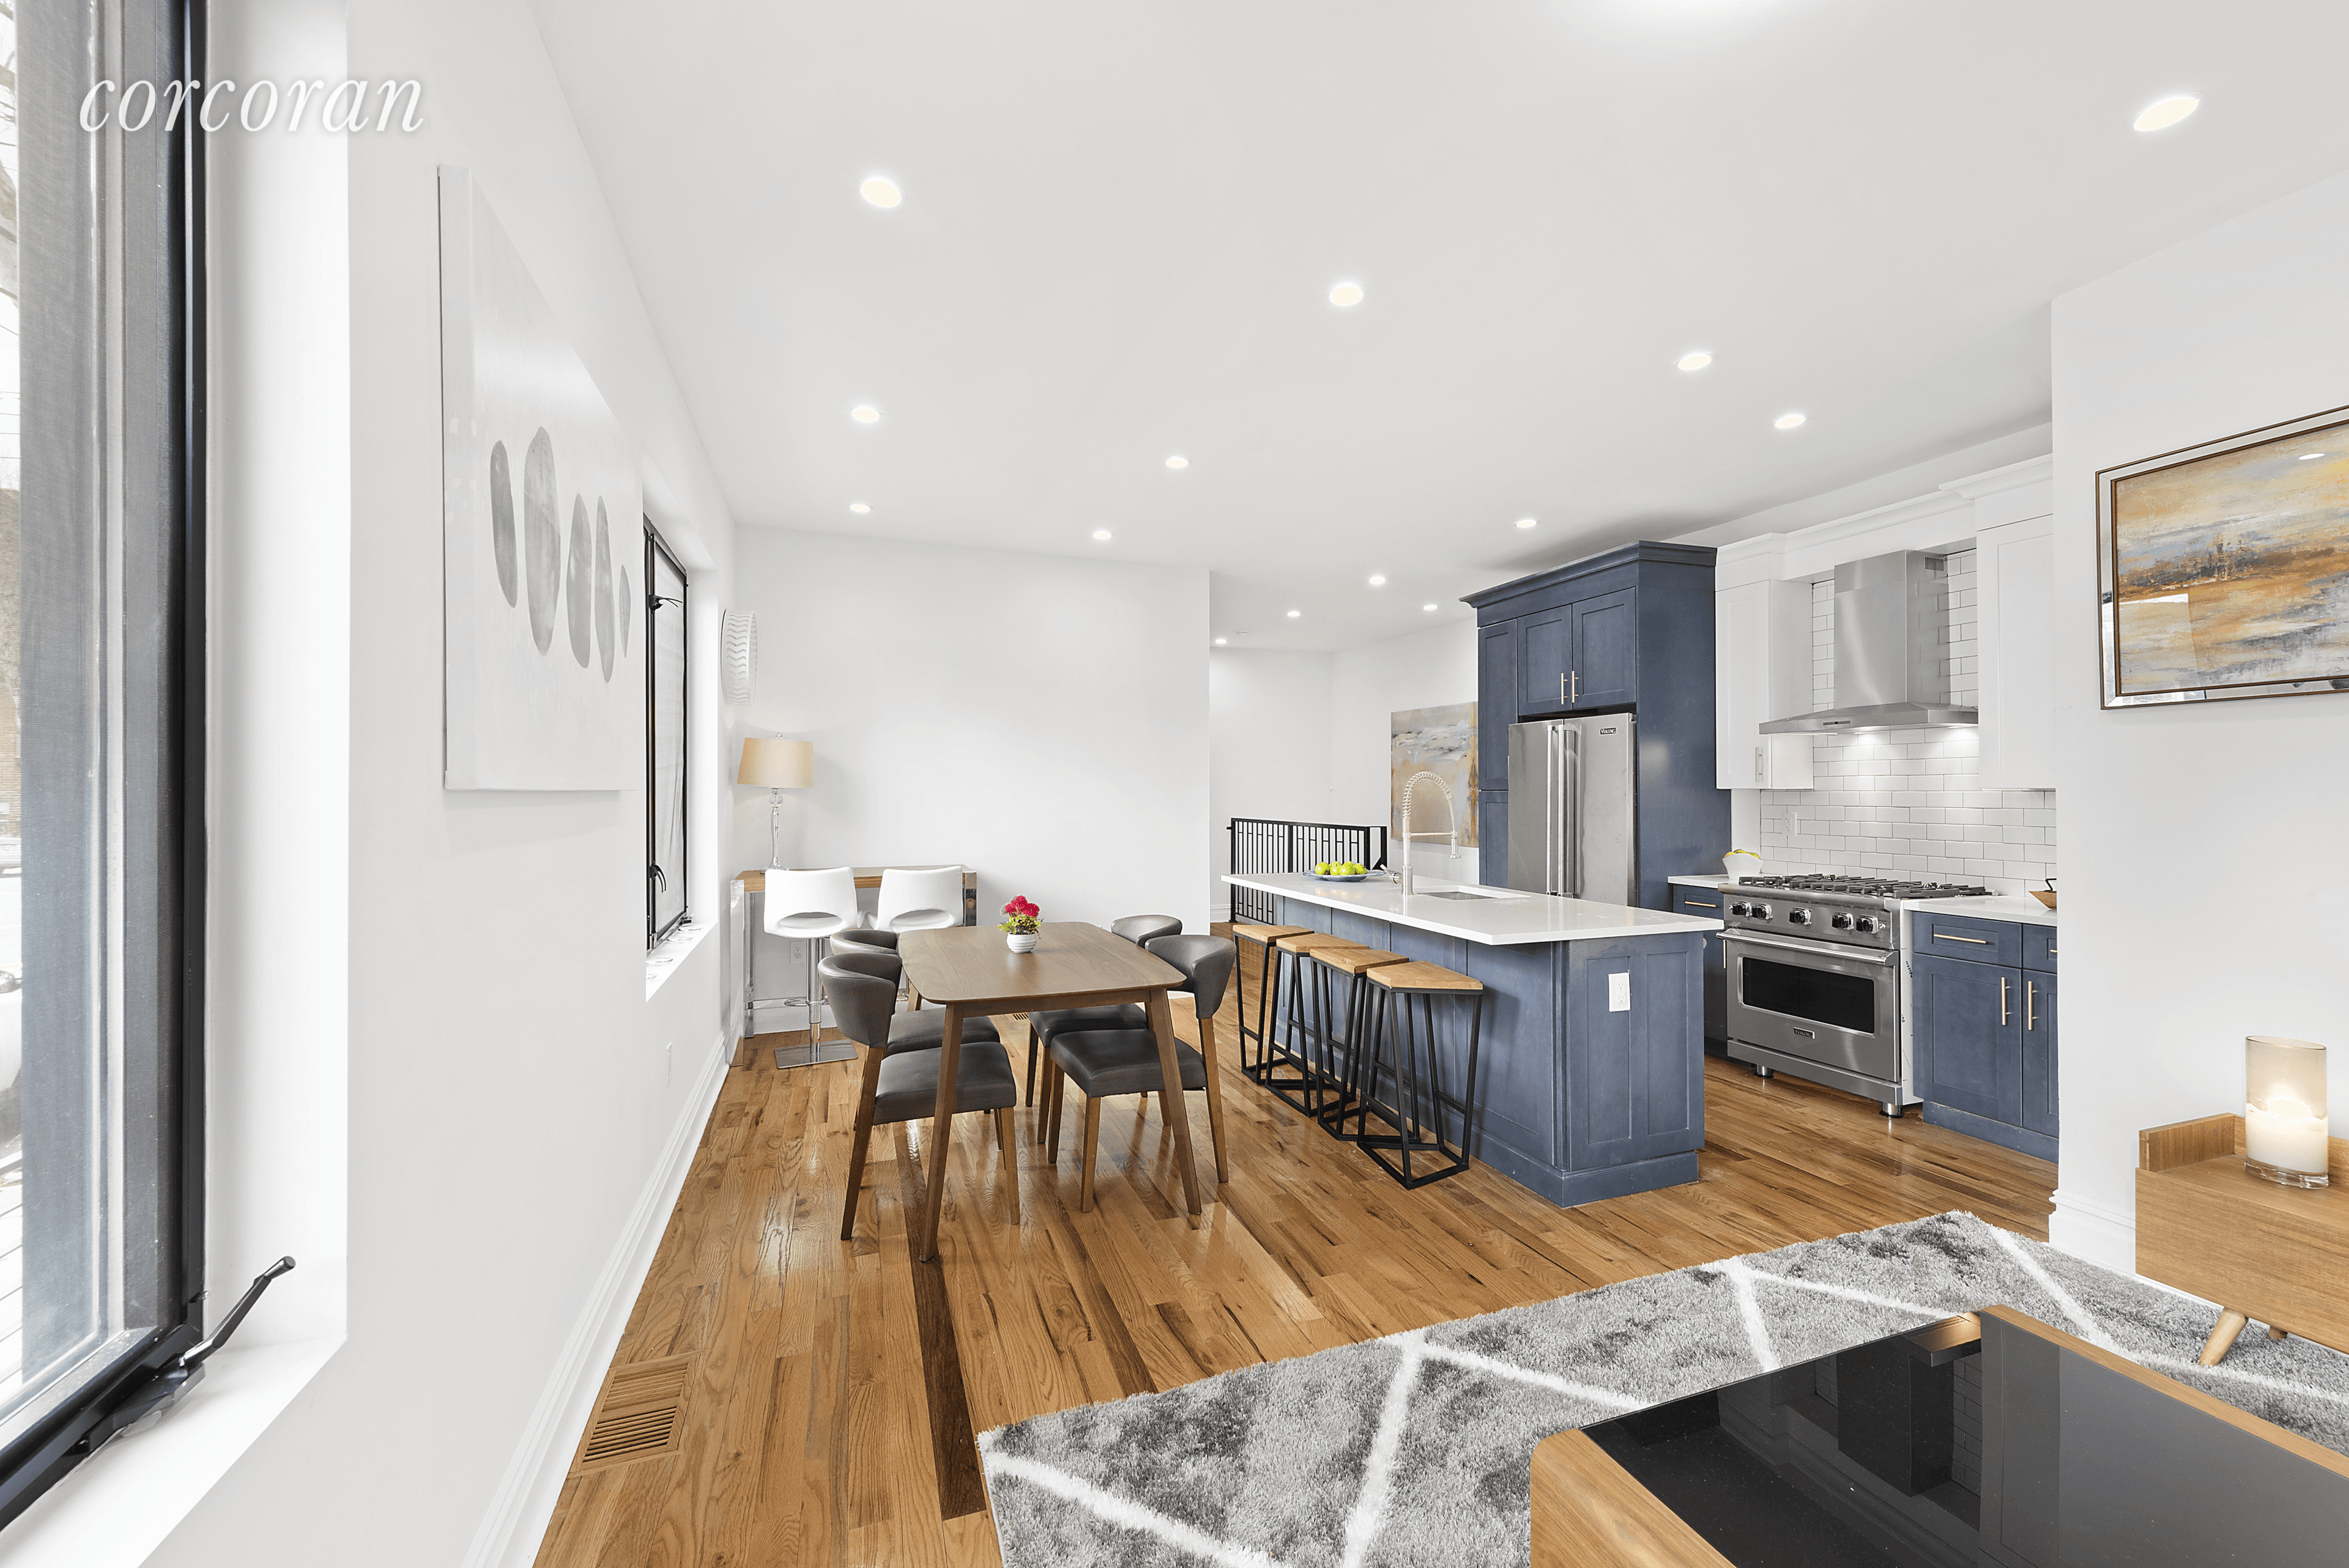 Introducing 453 Fenimore Street, a massive, two family residence featuring a three bedroom, two bathroom home over a three bedroom, two and a half bathroom duplex with a private parking ...